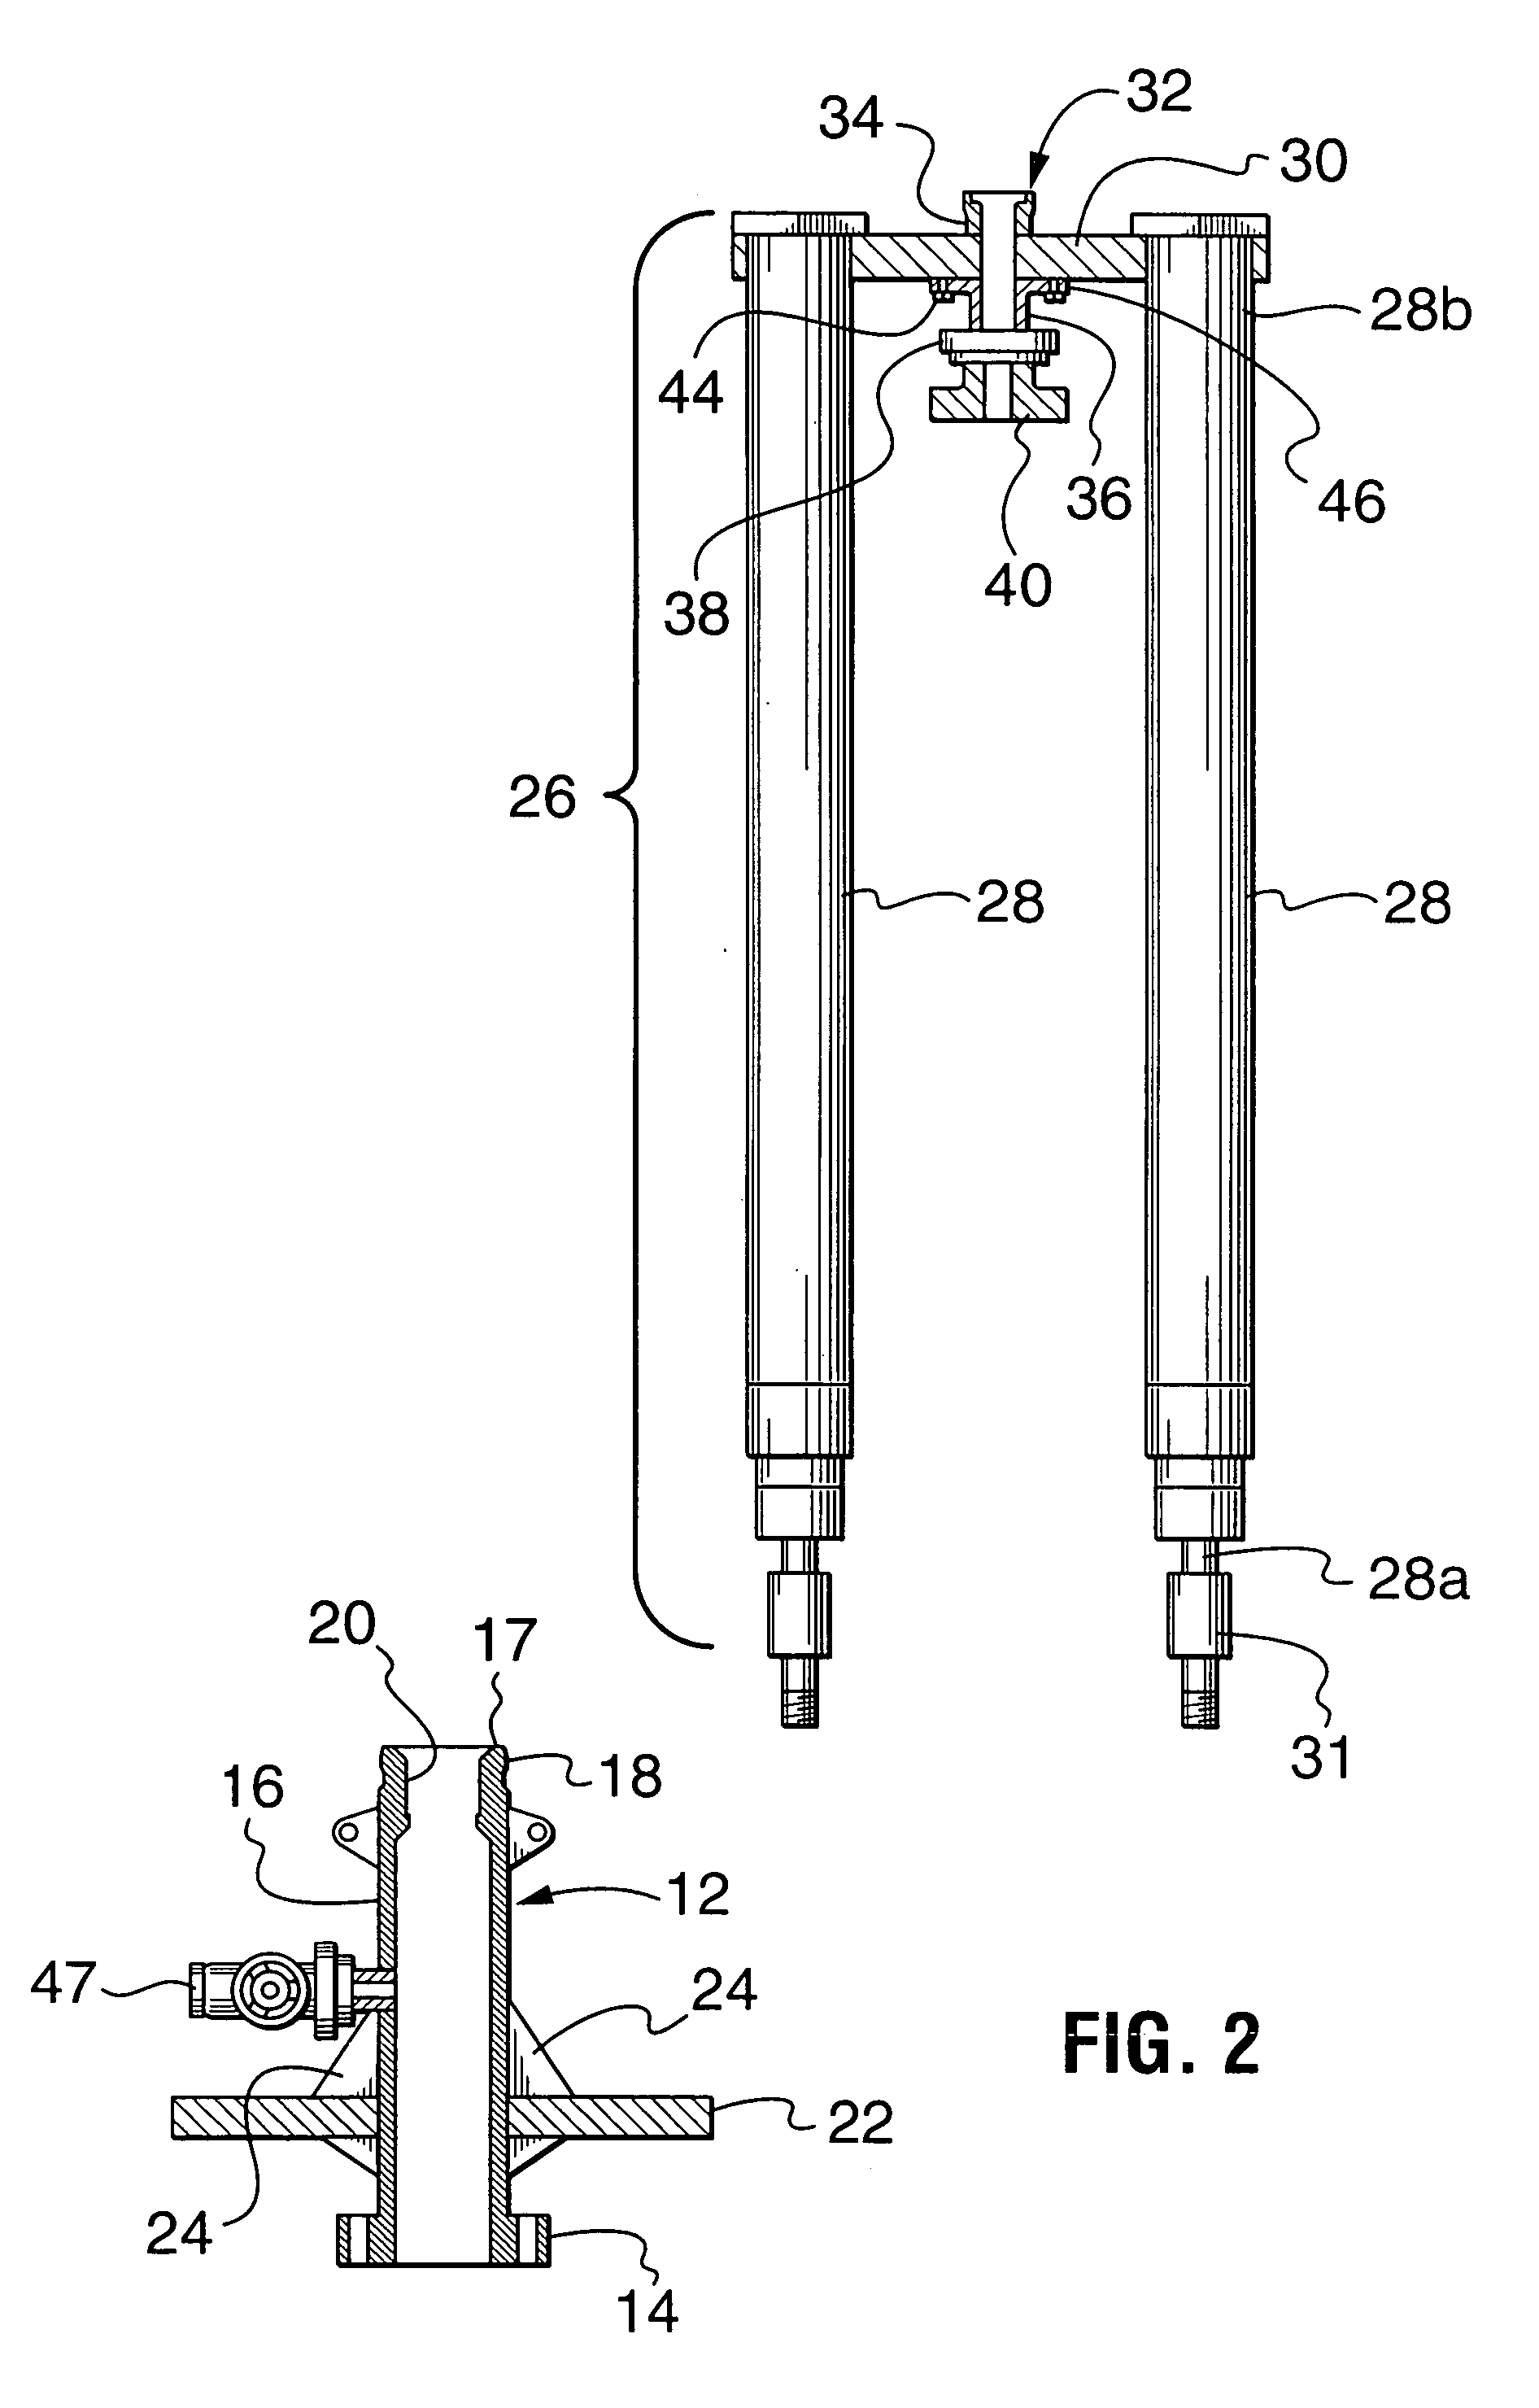 Apparatus for controlling a tool having a mandrel that must be stroked into or out of a well